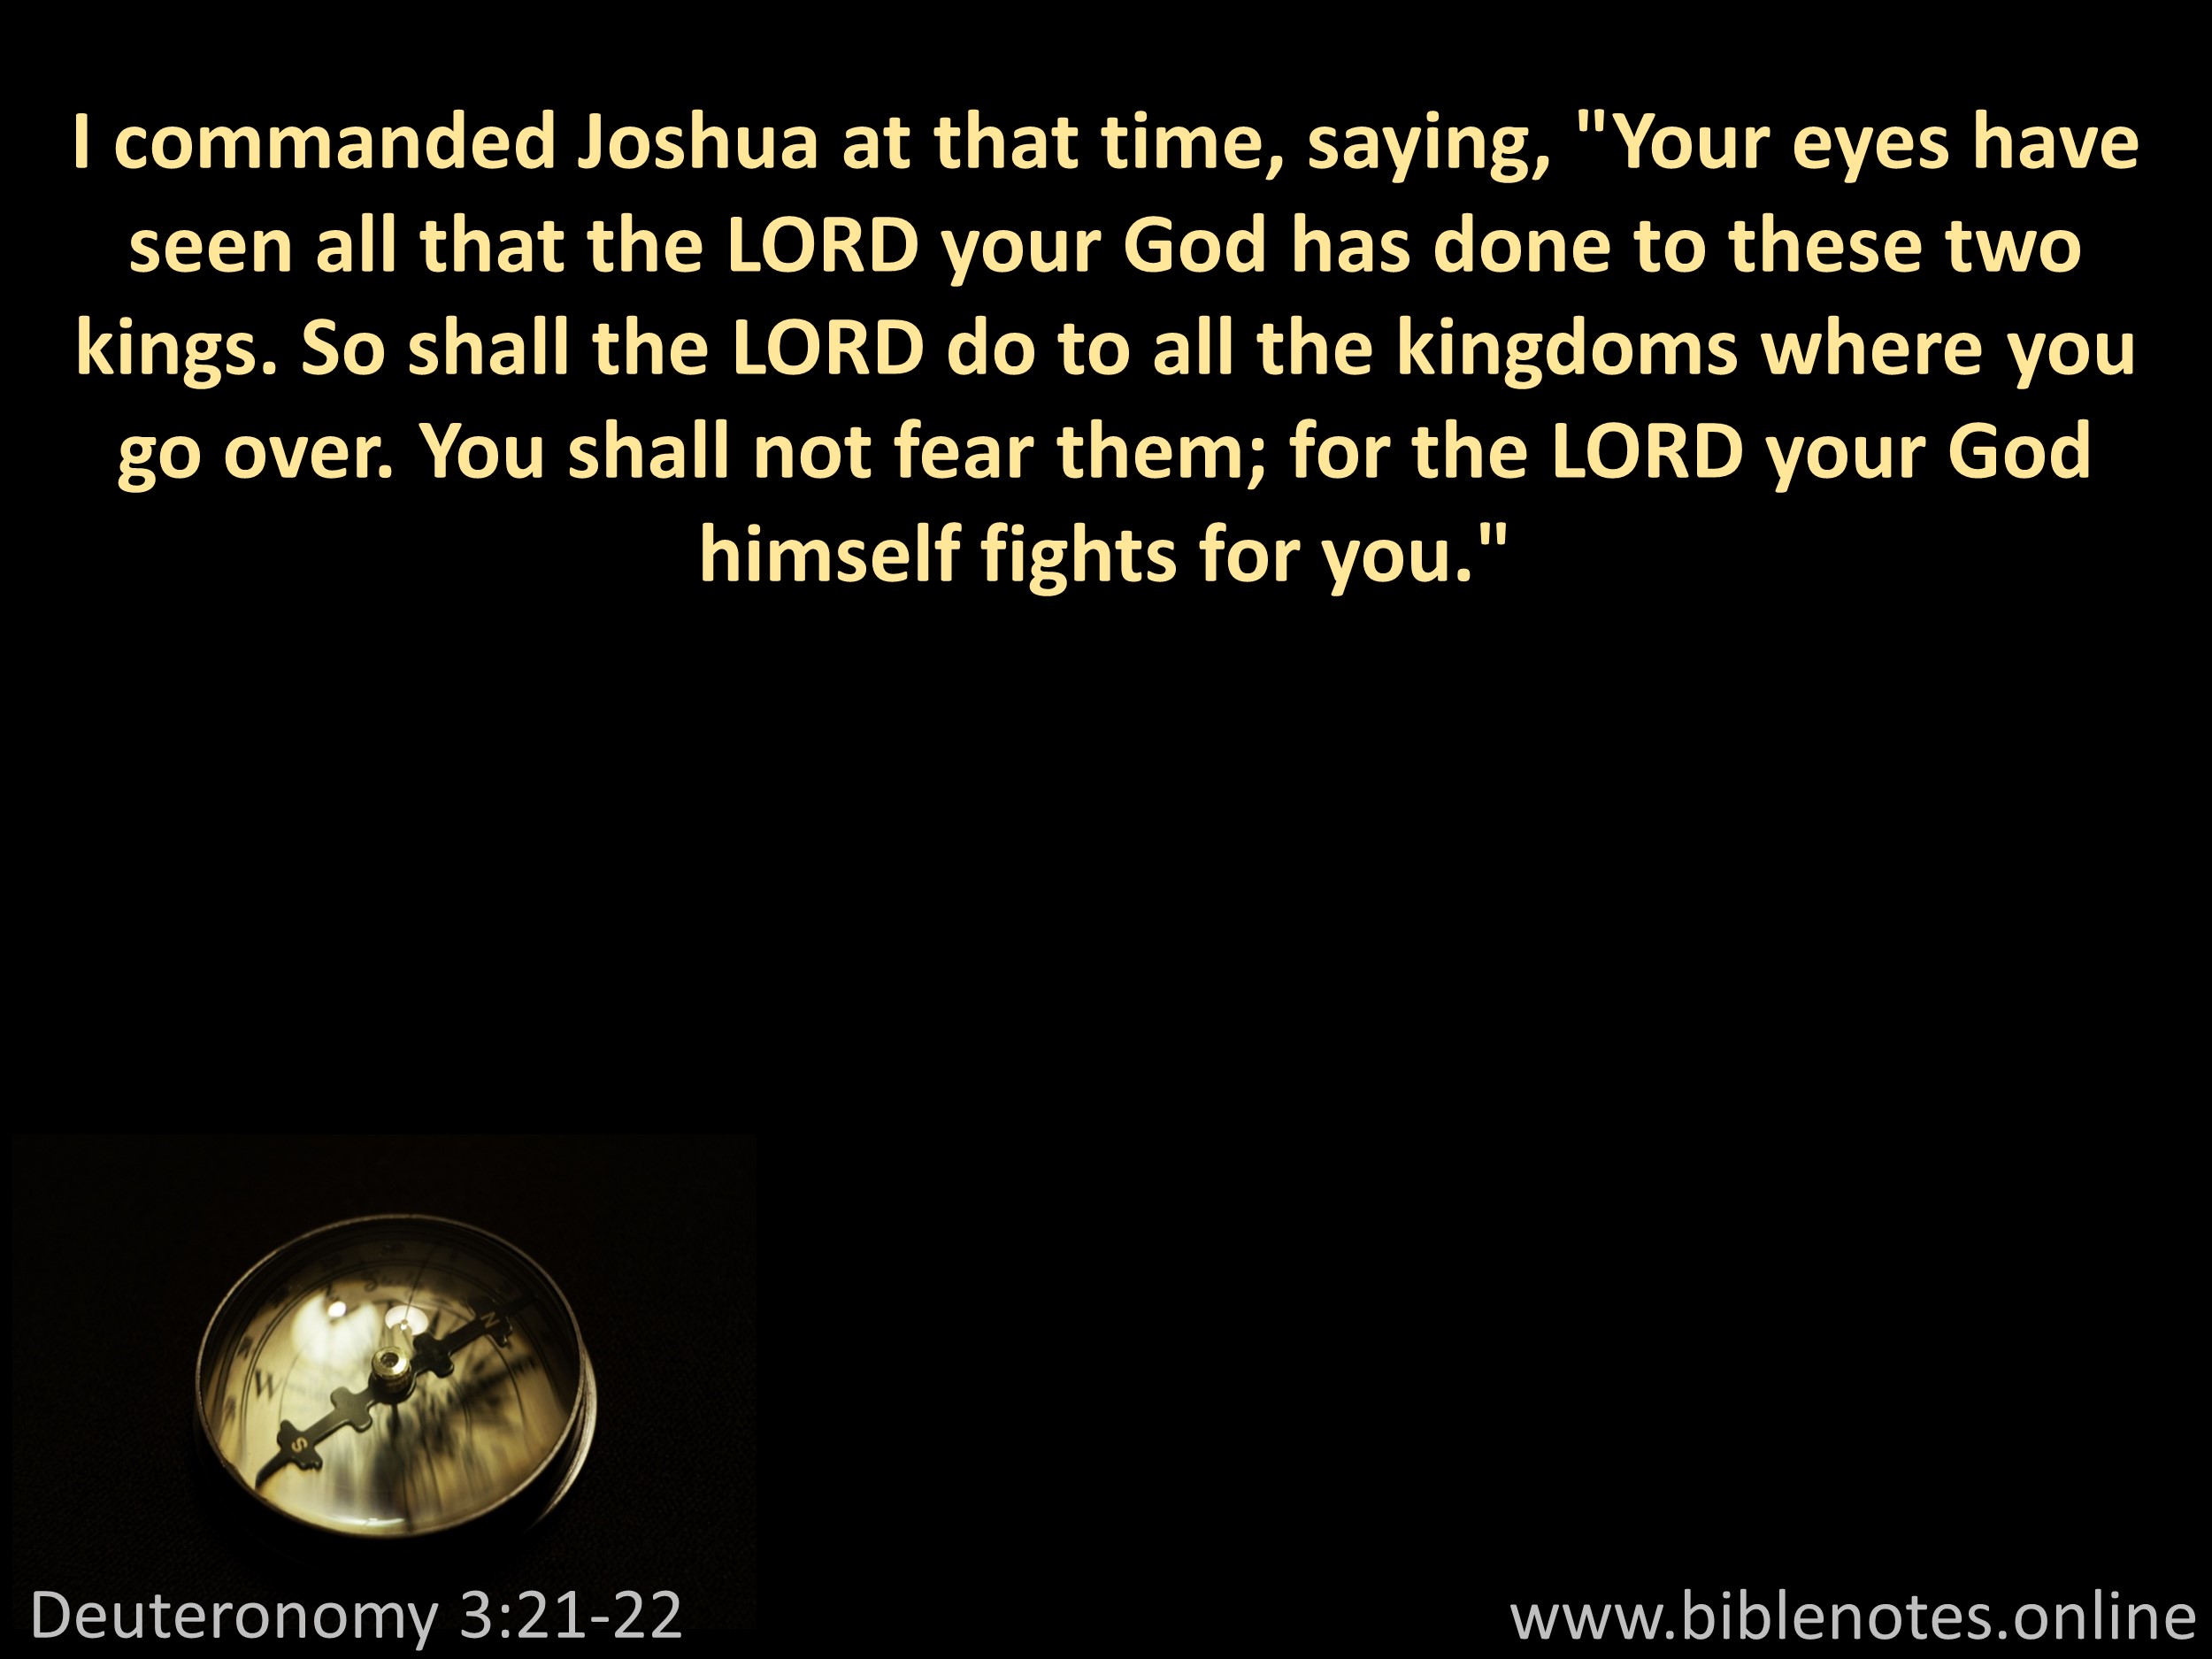 Bible Verse from Deuteronomy Chapter 3